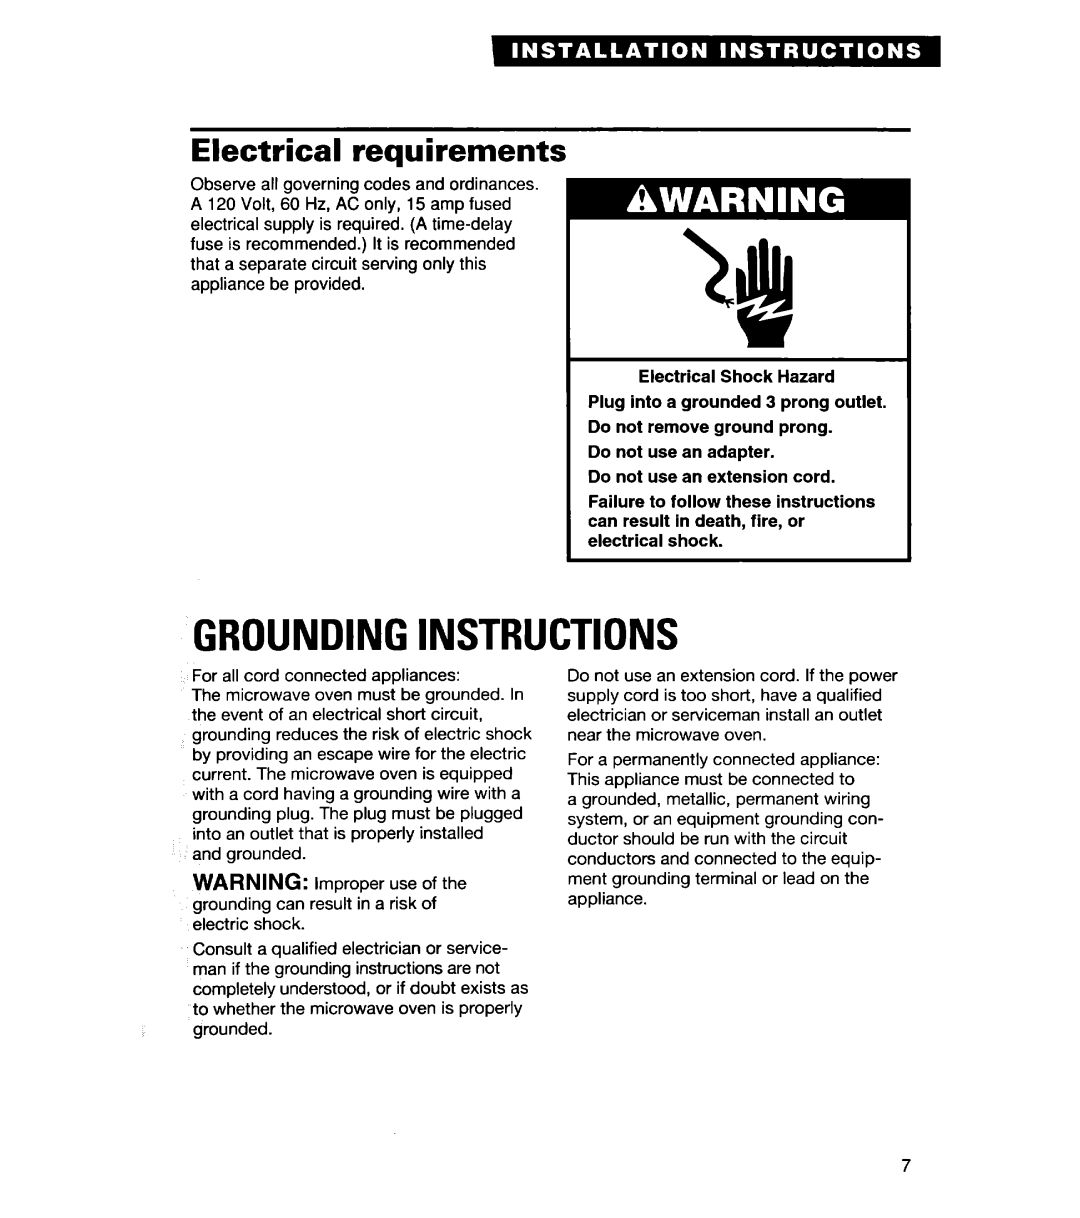 Whirlpool YMT8118SE, YMT9114SF, MT8118XE, MT8116XE, YMT8116SE, YMT8078SE Groundinginstructions, Electrical requirements 